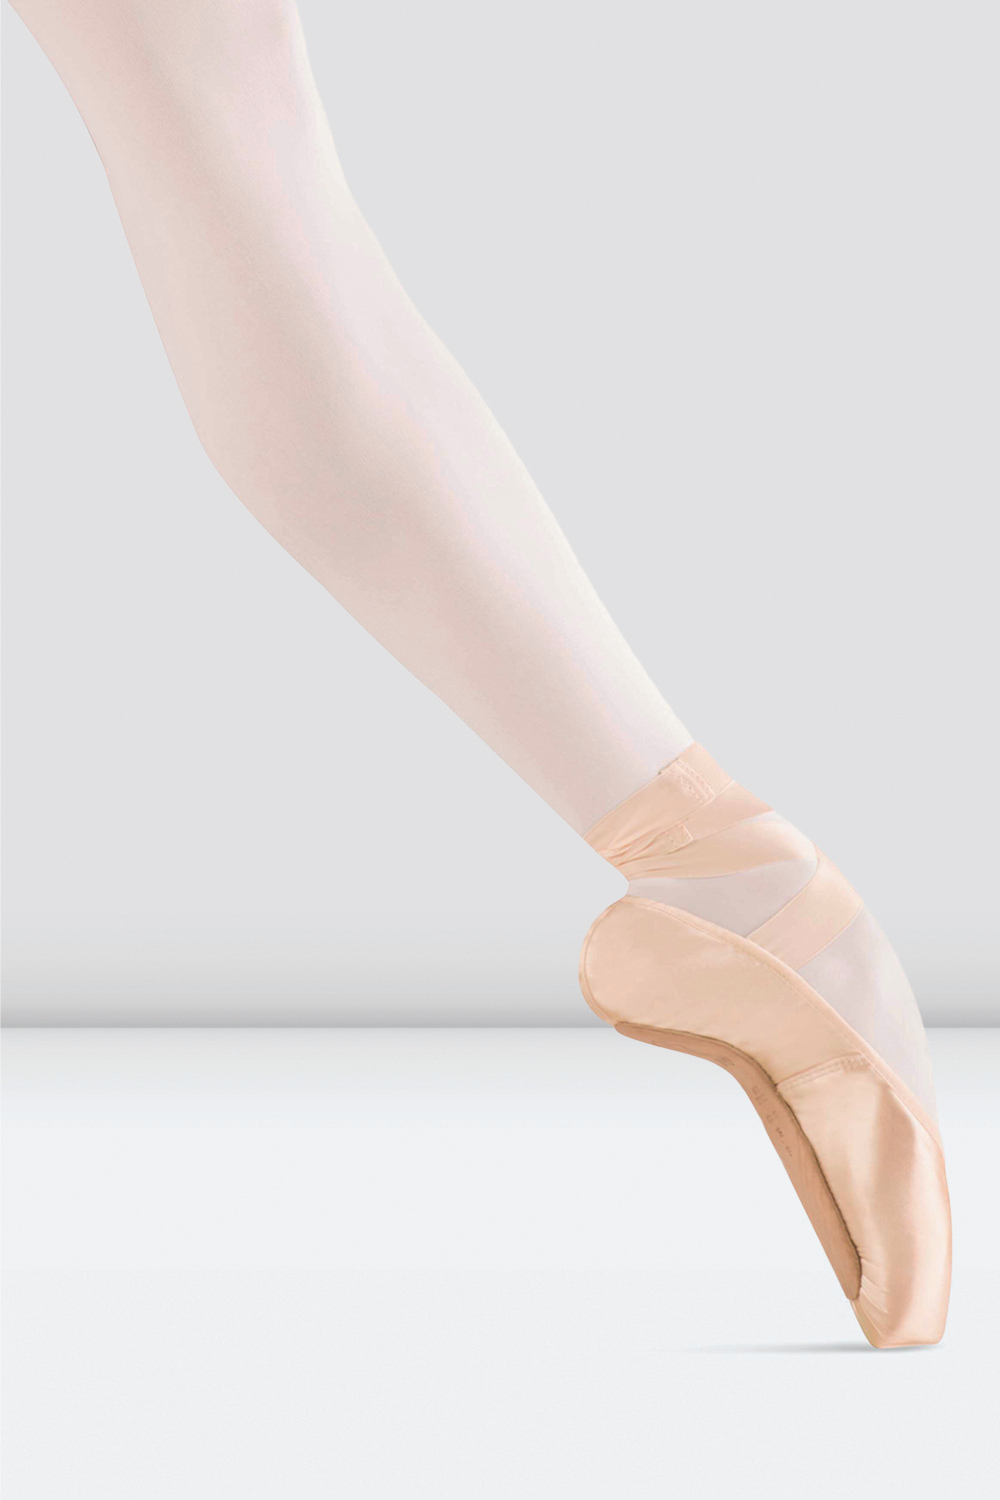 Girls Footed Tights, White – BLOCH Dance US